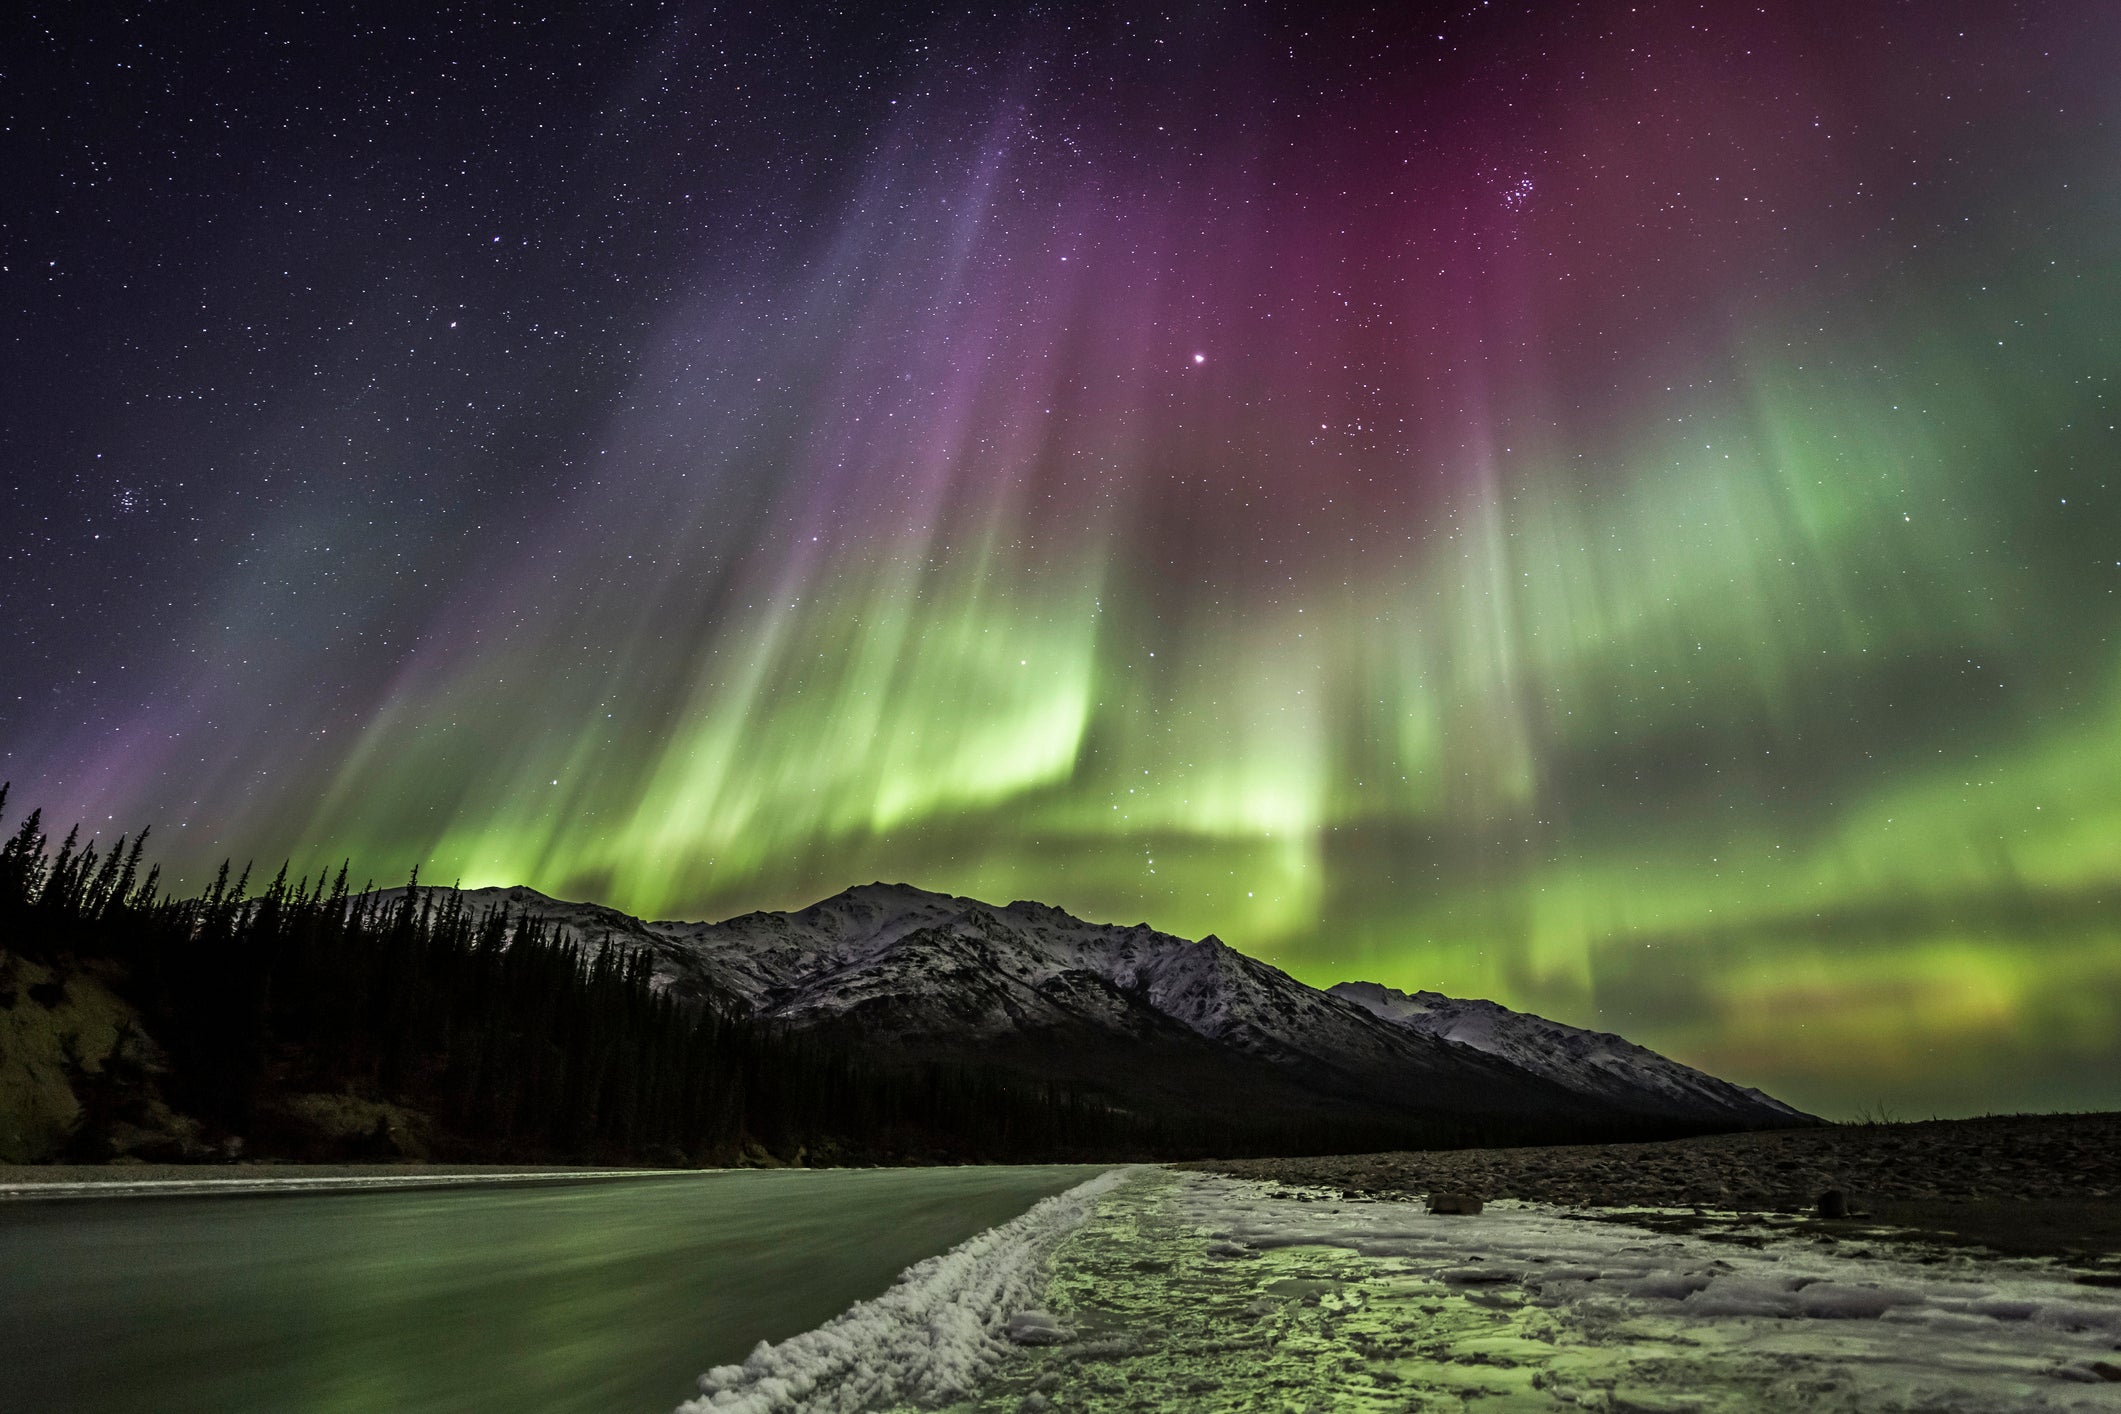 Northern lights shine brightly above a mountain and lake